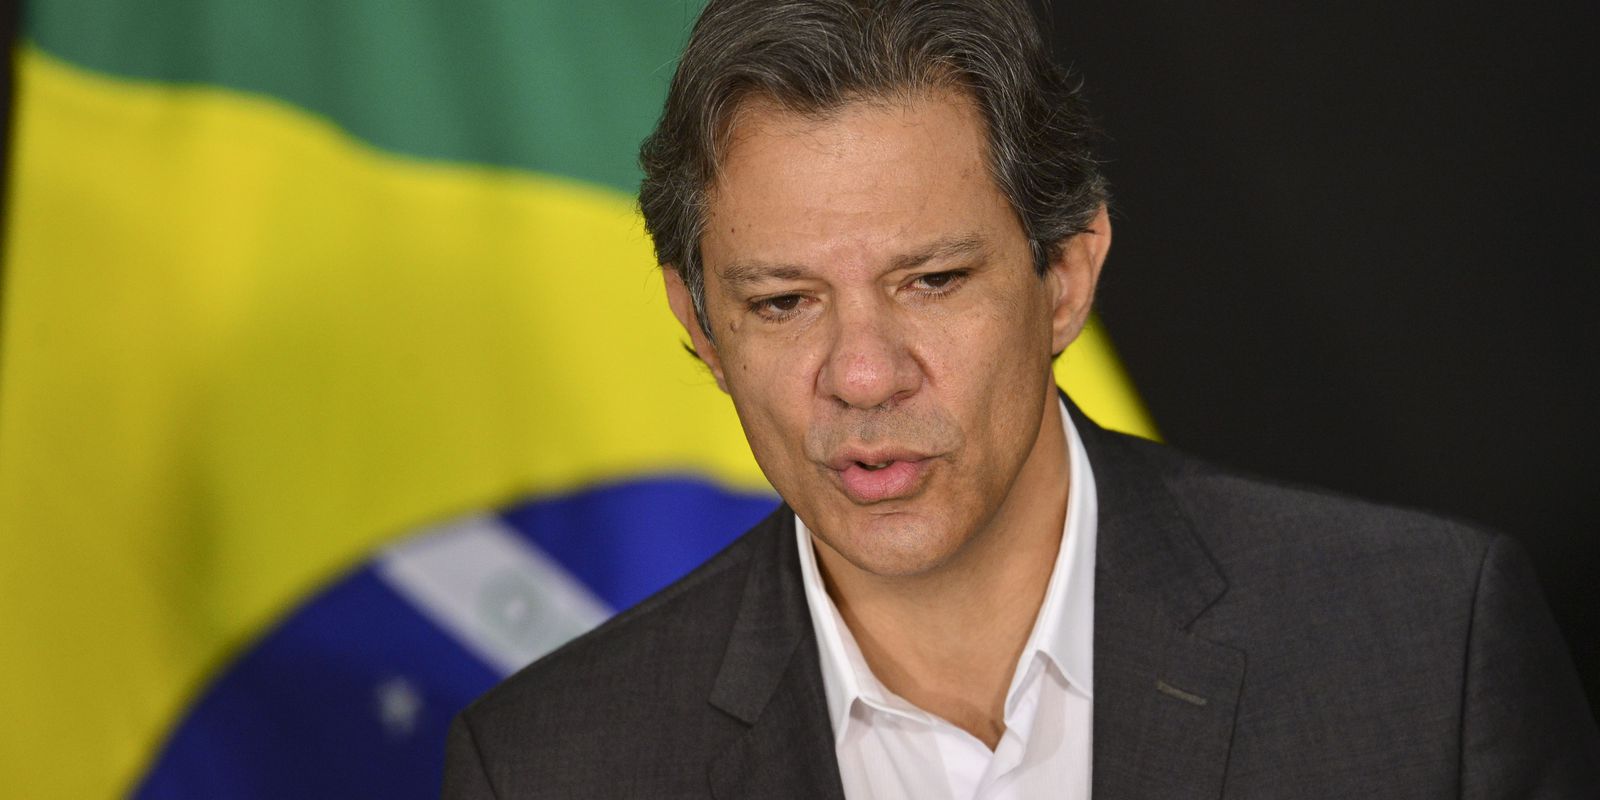 Minimum wage “will be paid normally”, says Haddad